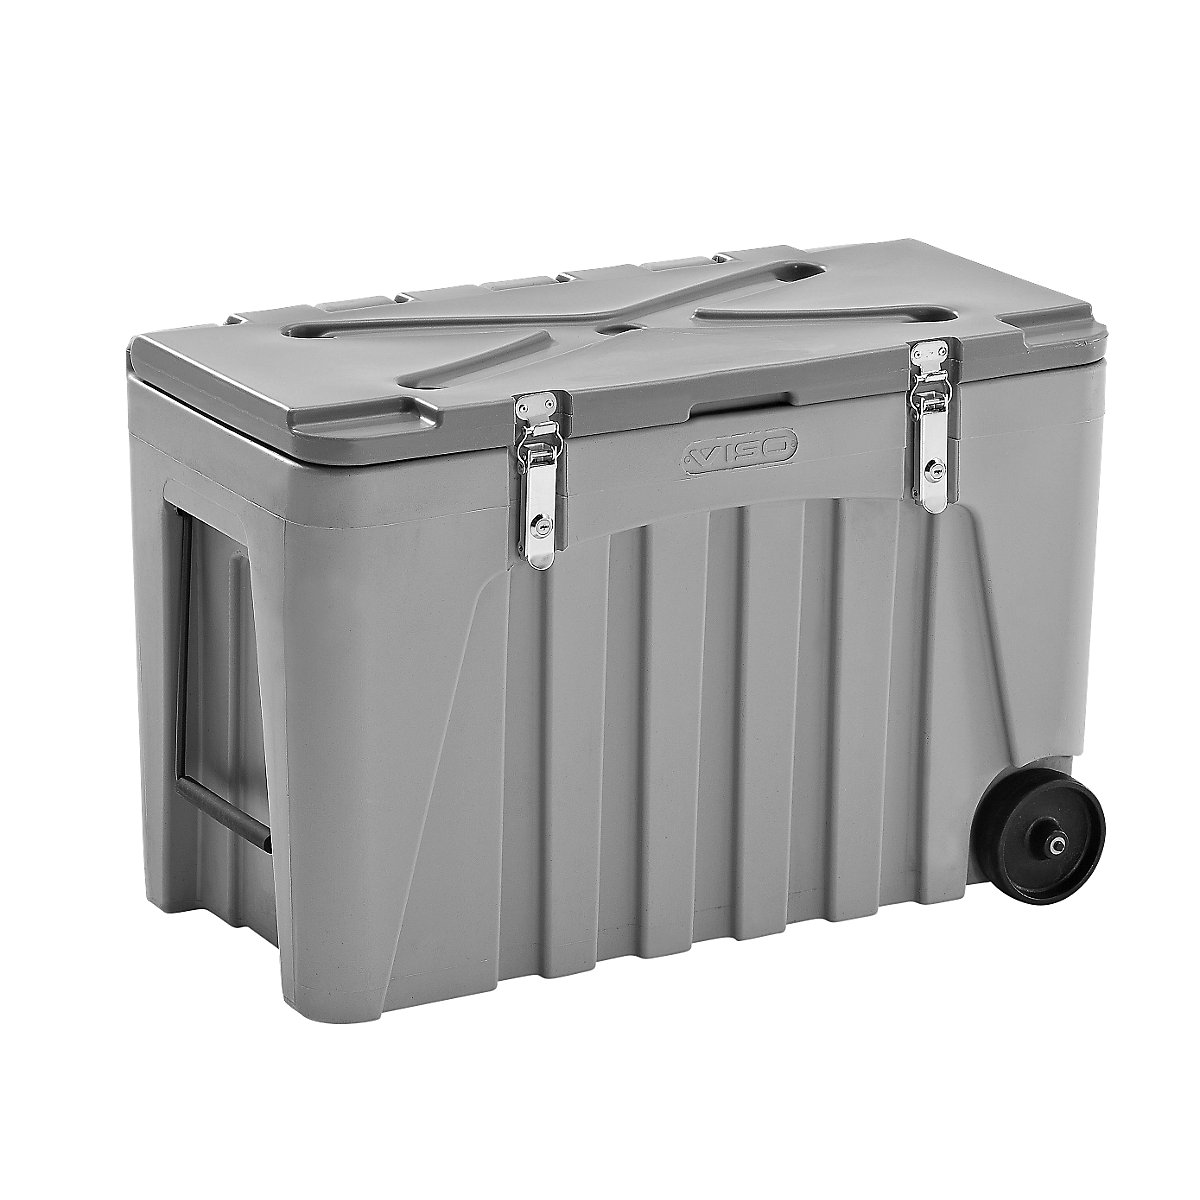 Universal container – VISO, made of polypropylene, with lock at the side, capacity 176 l-2